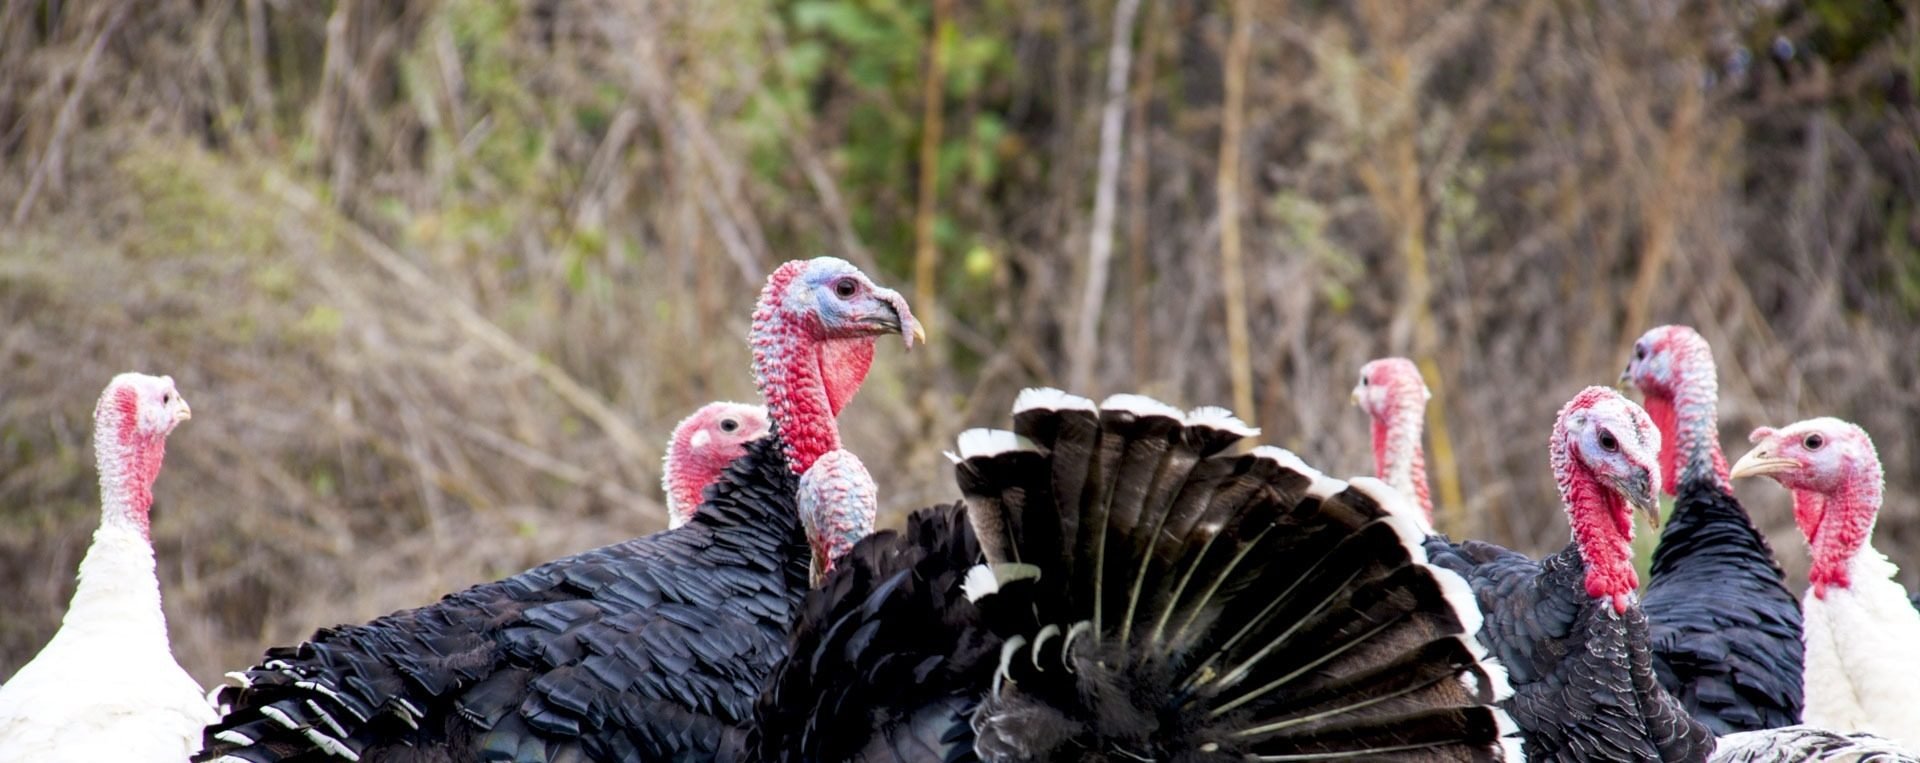 Your Guide to Buying and Cooking a Heritage Turkey for Thanksgiving